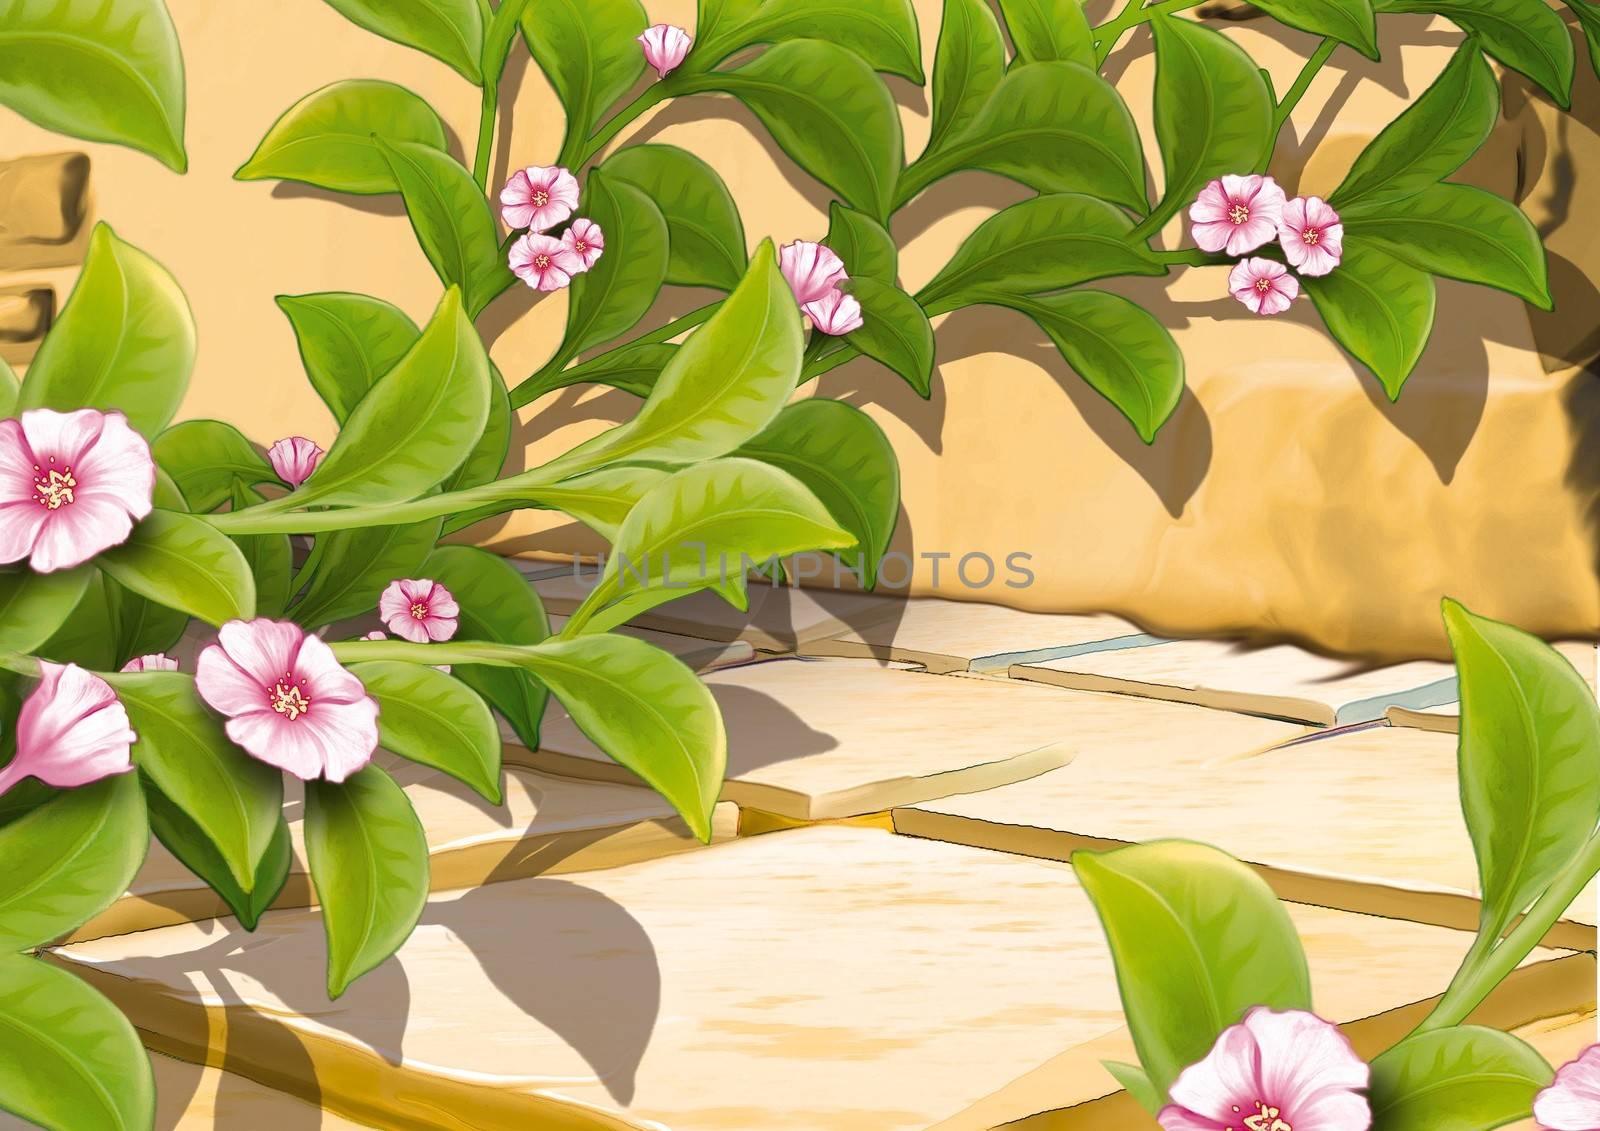 Creeping Plant With Flowers - Background Illustration